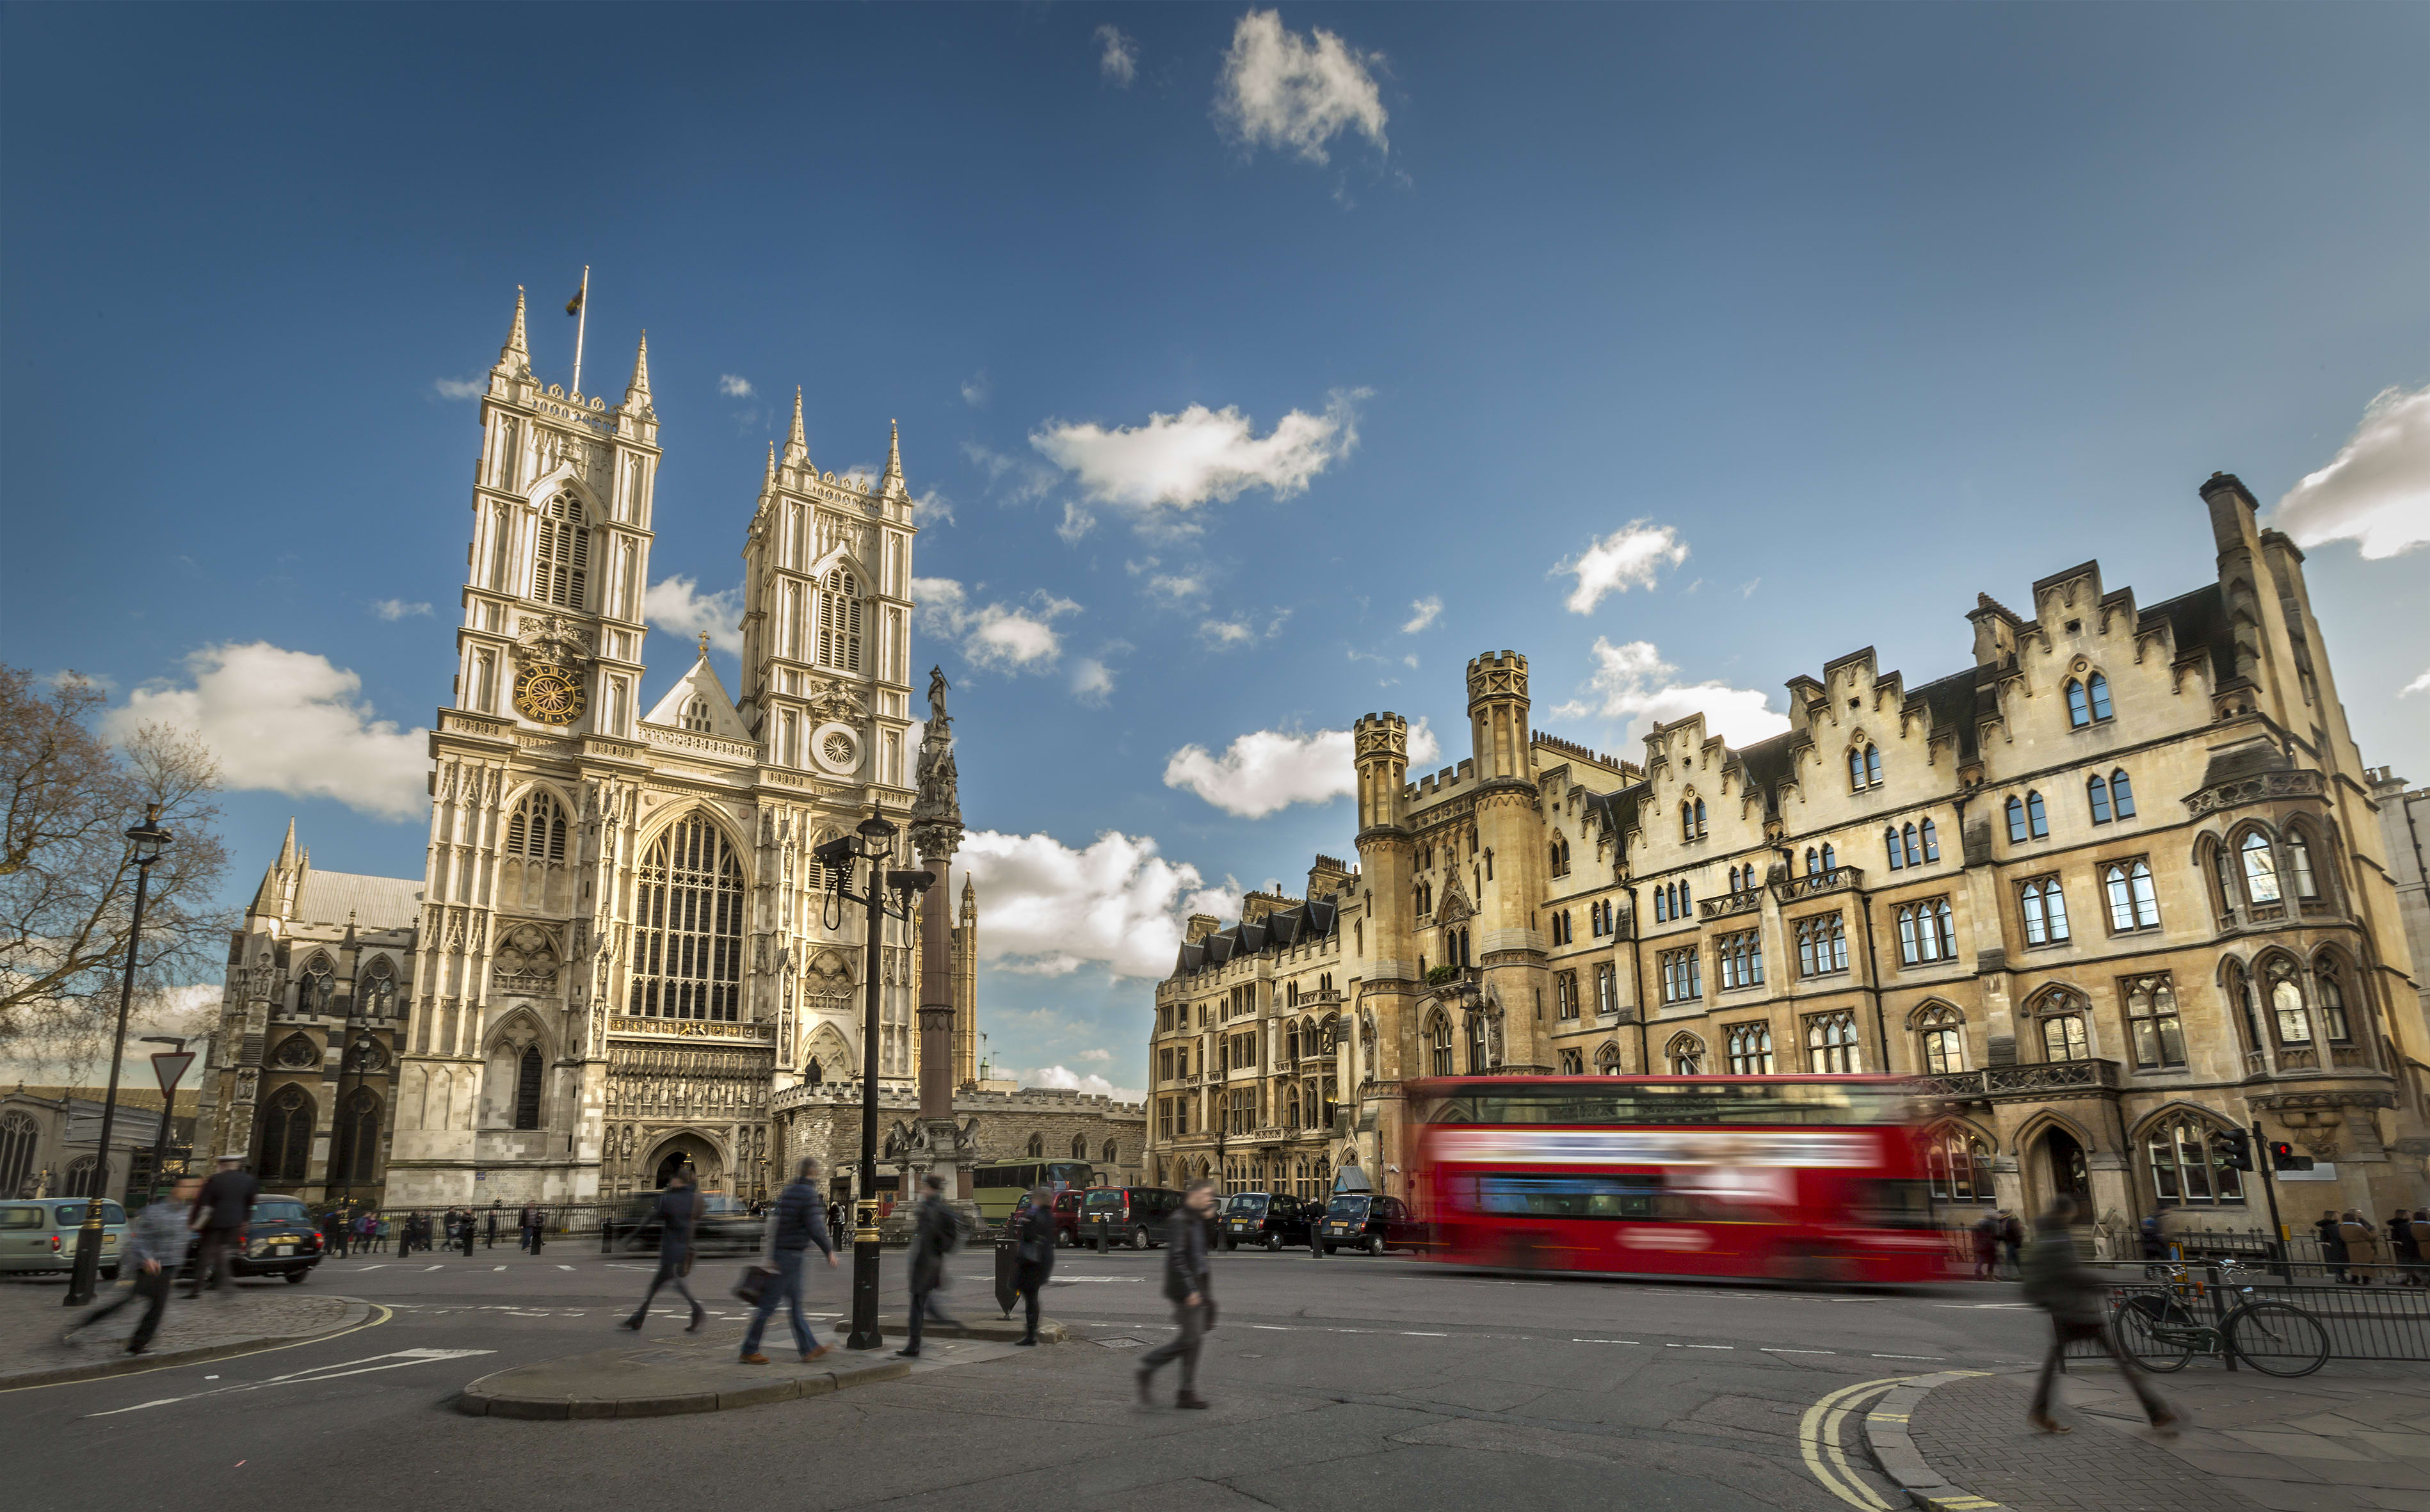 Westminster Abbey exterior with red London bus in foreground